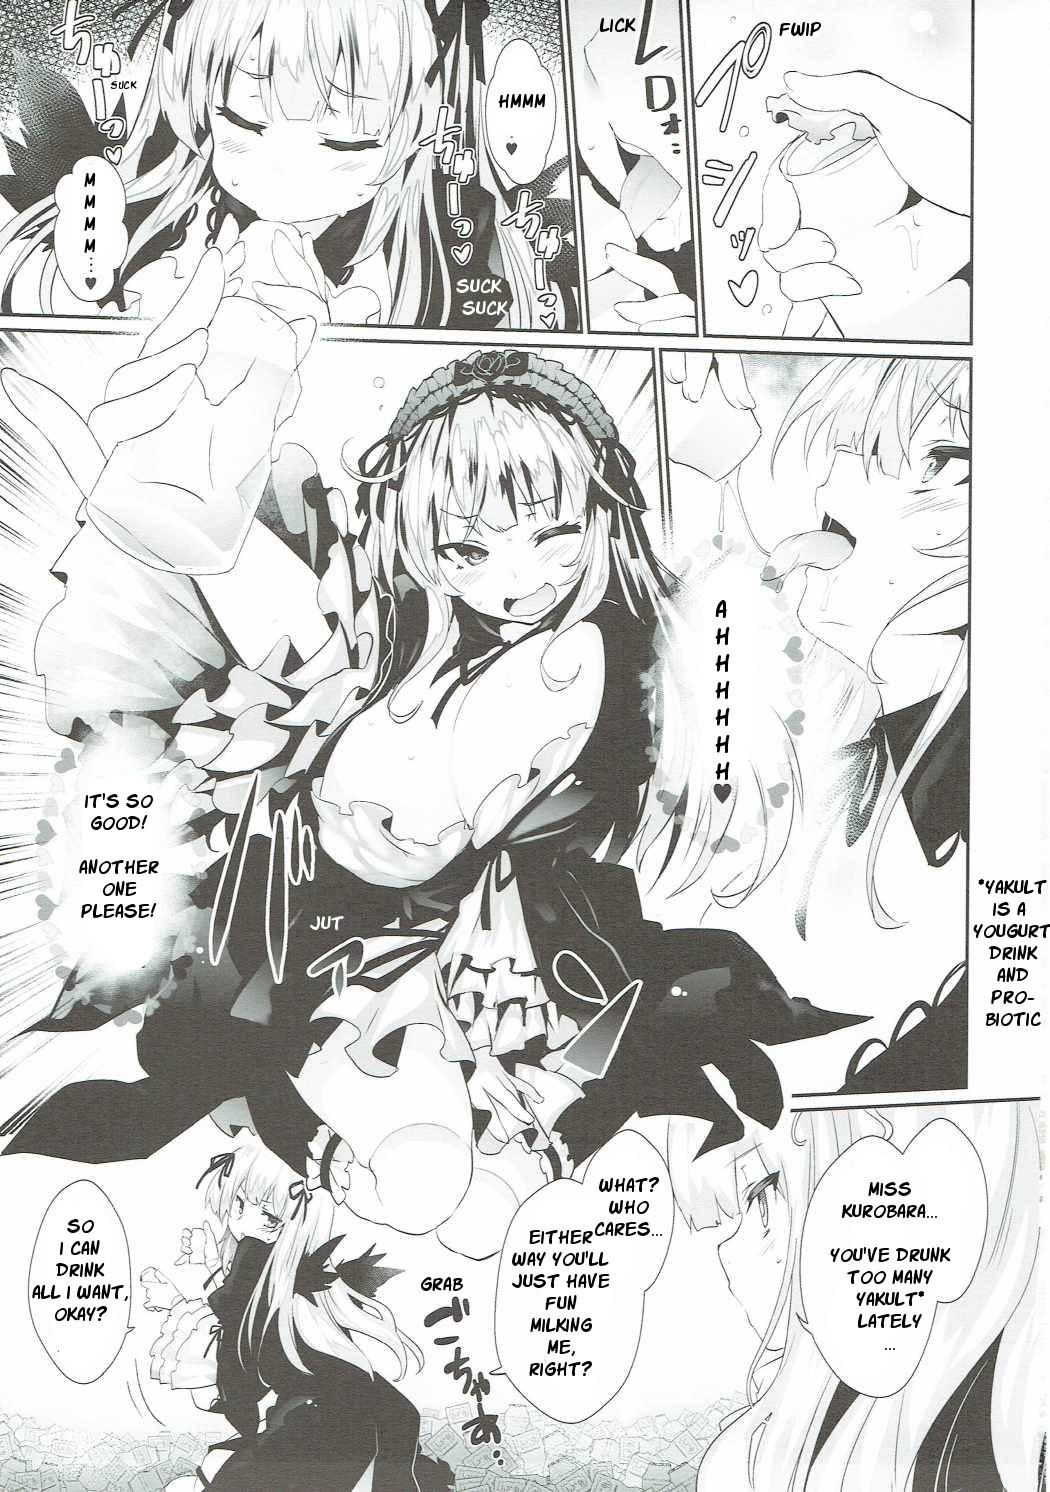 Bald Pussy Bara Niku! 3 - Rozen maiden Gay Party - Page 2